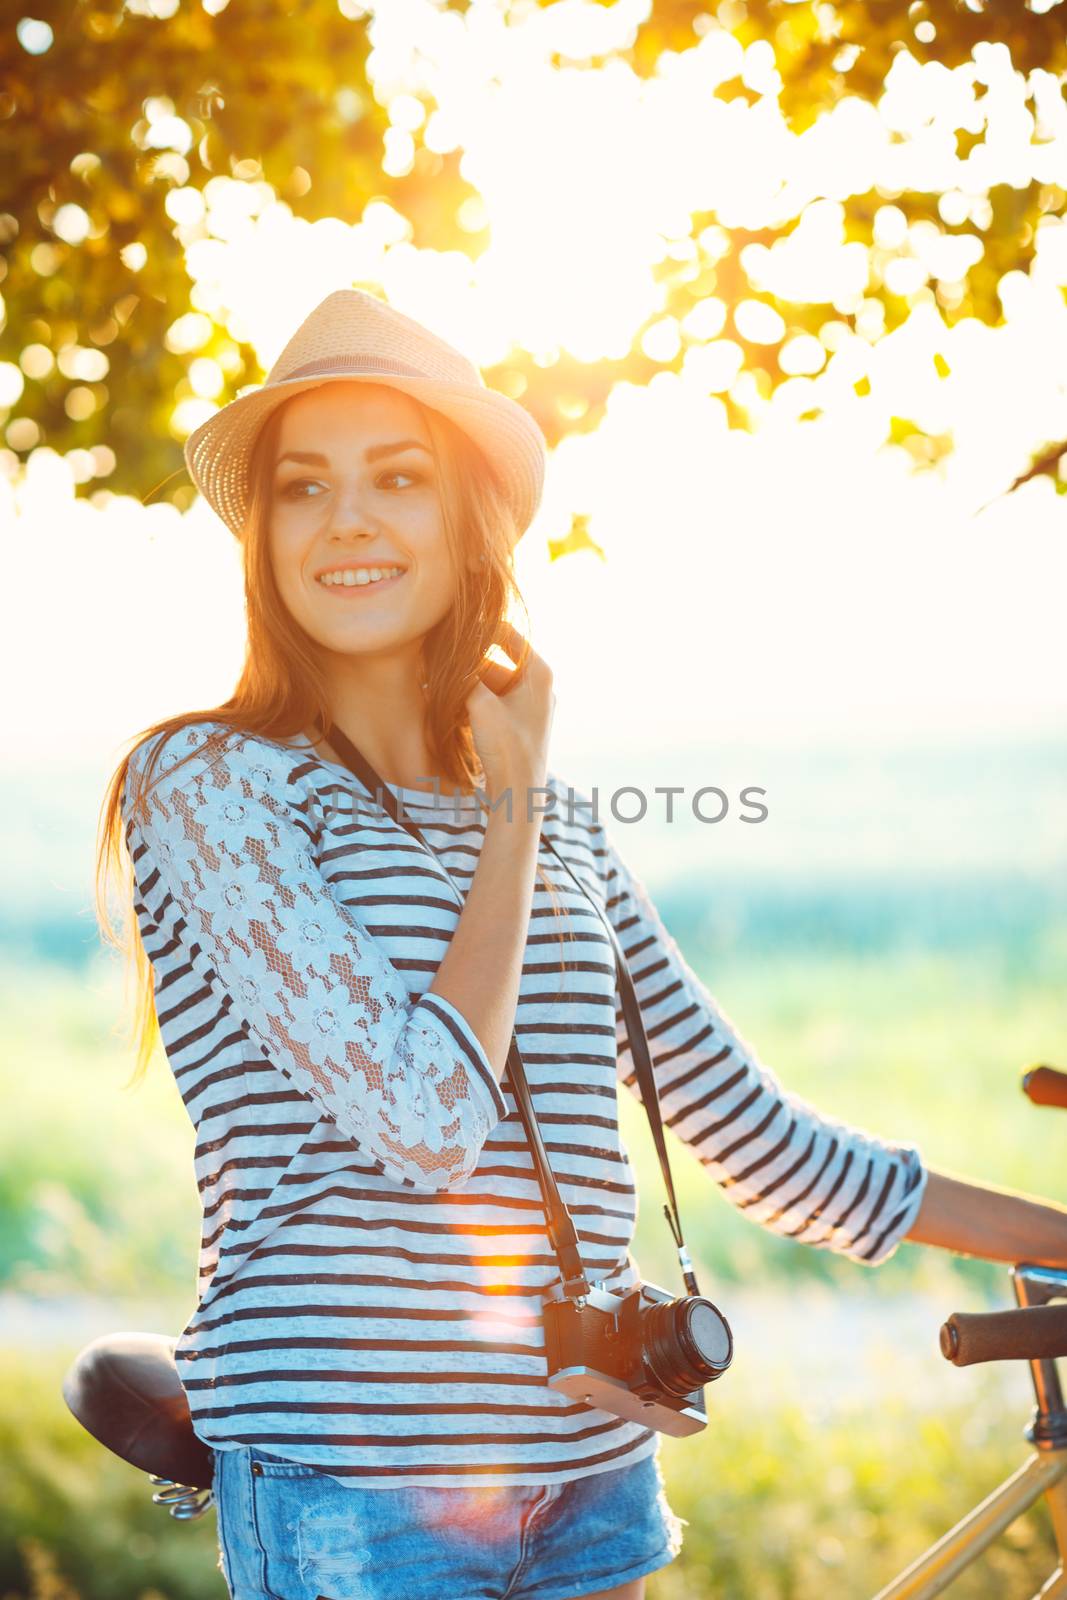 Lovely young woman in a hat riding a bicycle outdoors. Active pe by vlad_star